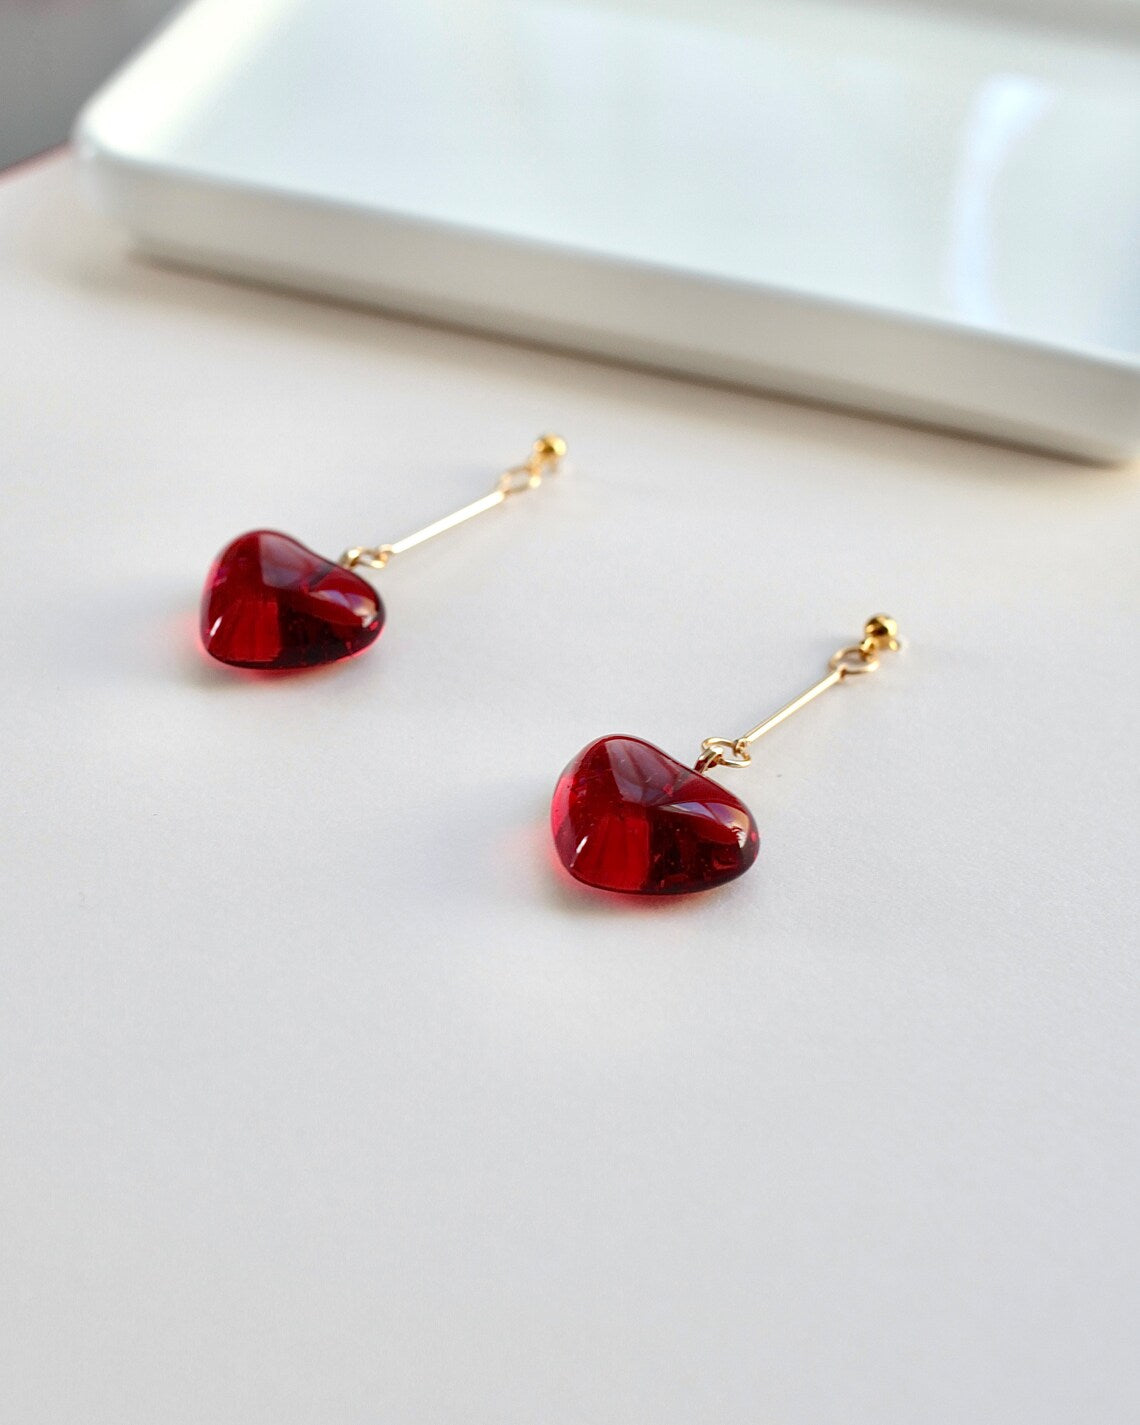 Red Heart Hoop Earrings - 2 Styles – The Songbird Collection